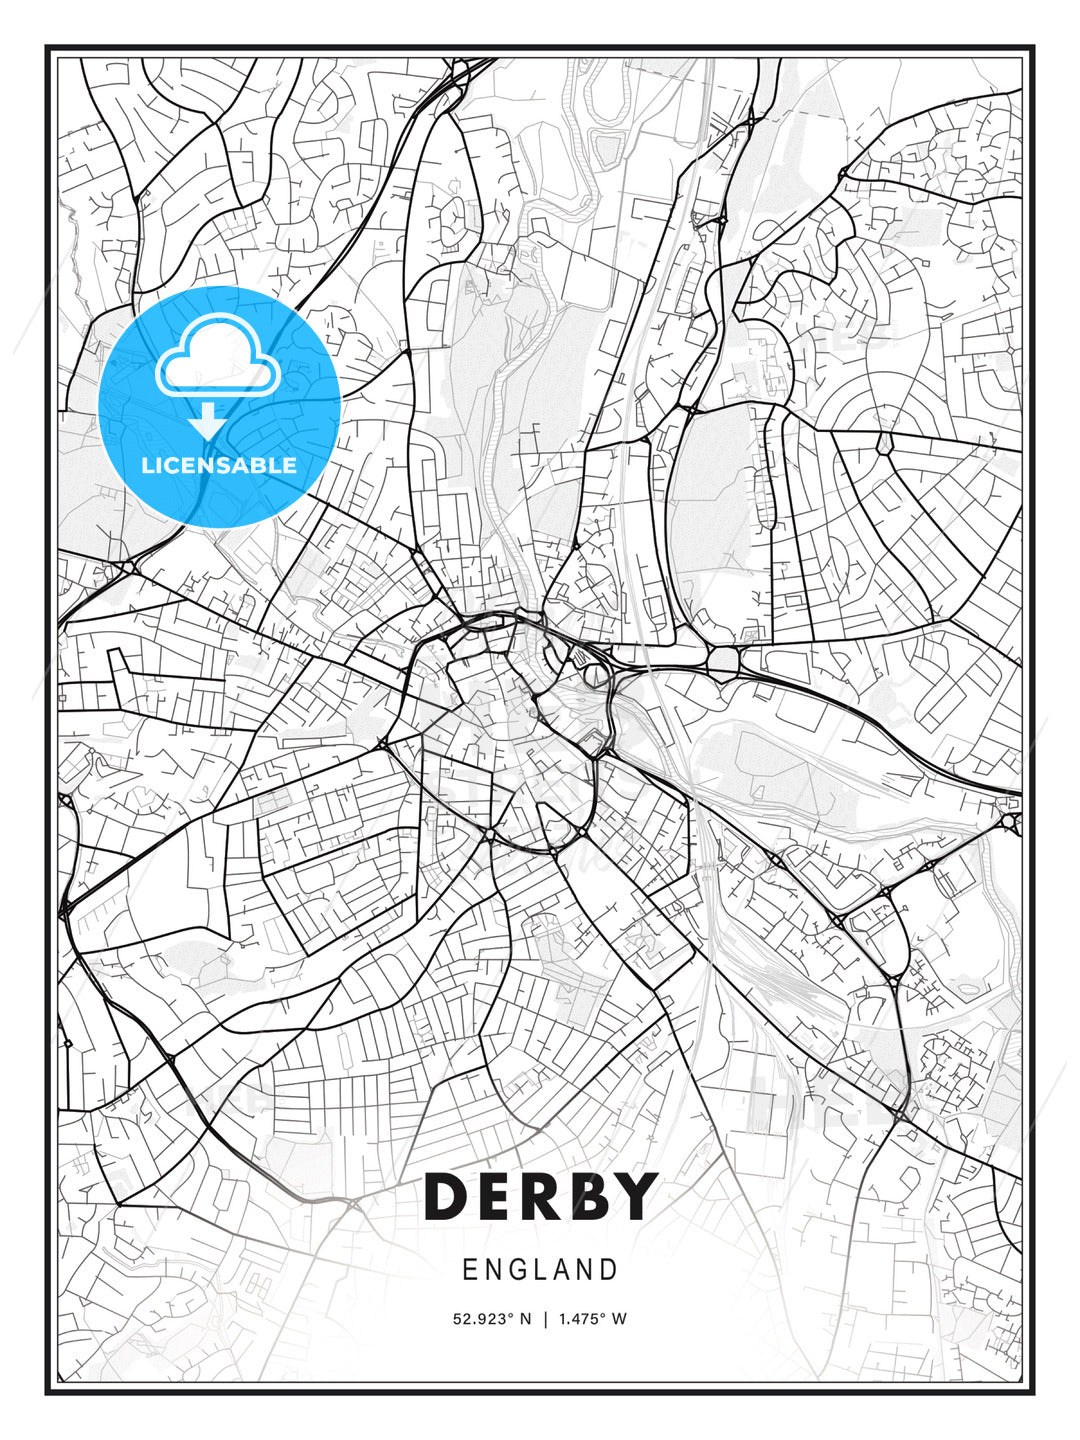 Derby, England, Modern Print Template in Various Formats - HEBSTREITS Sketches